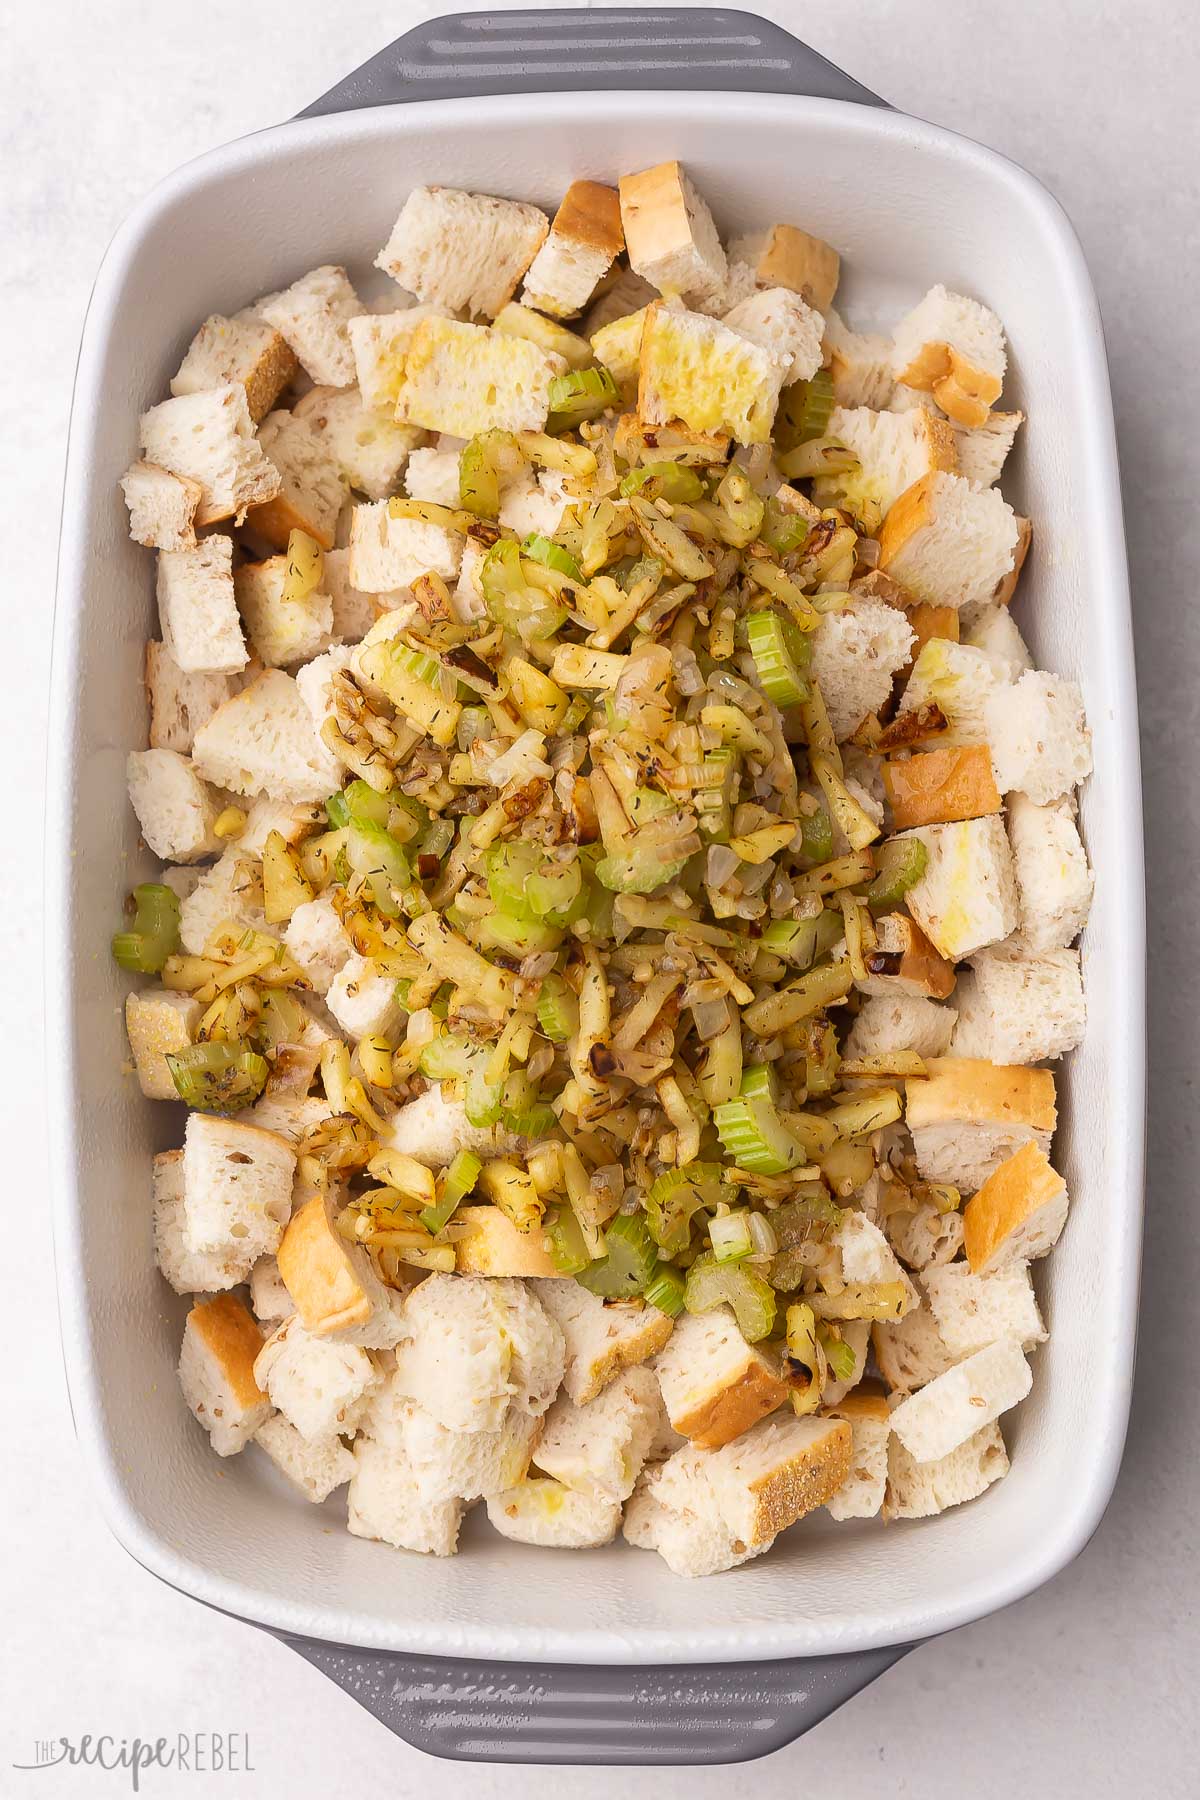 sauteed vegetables added to bread cubes in baking dish.